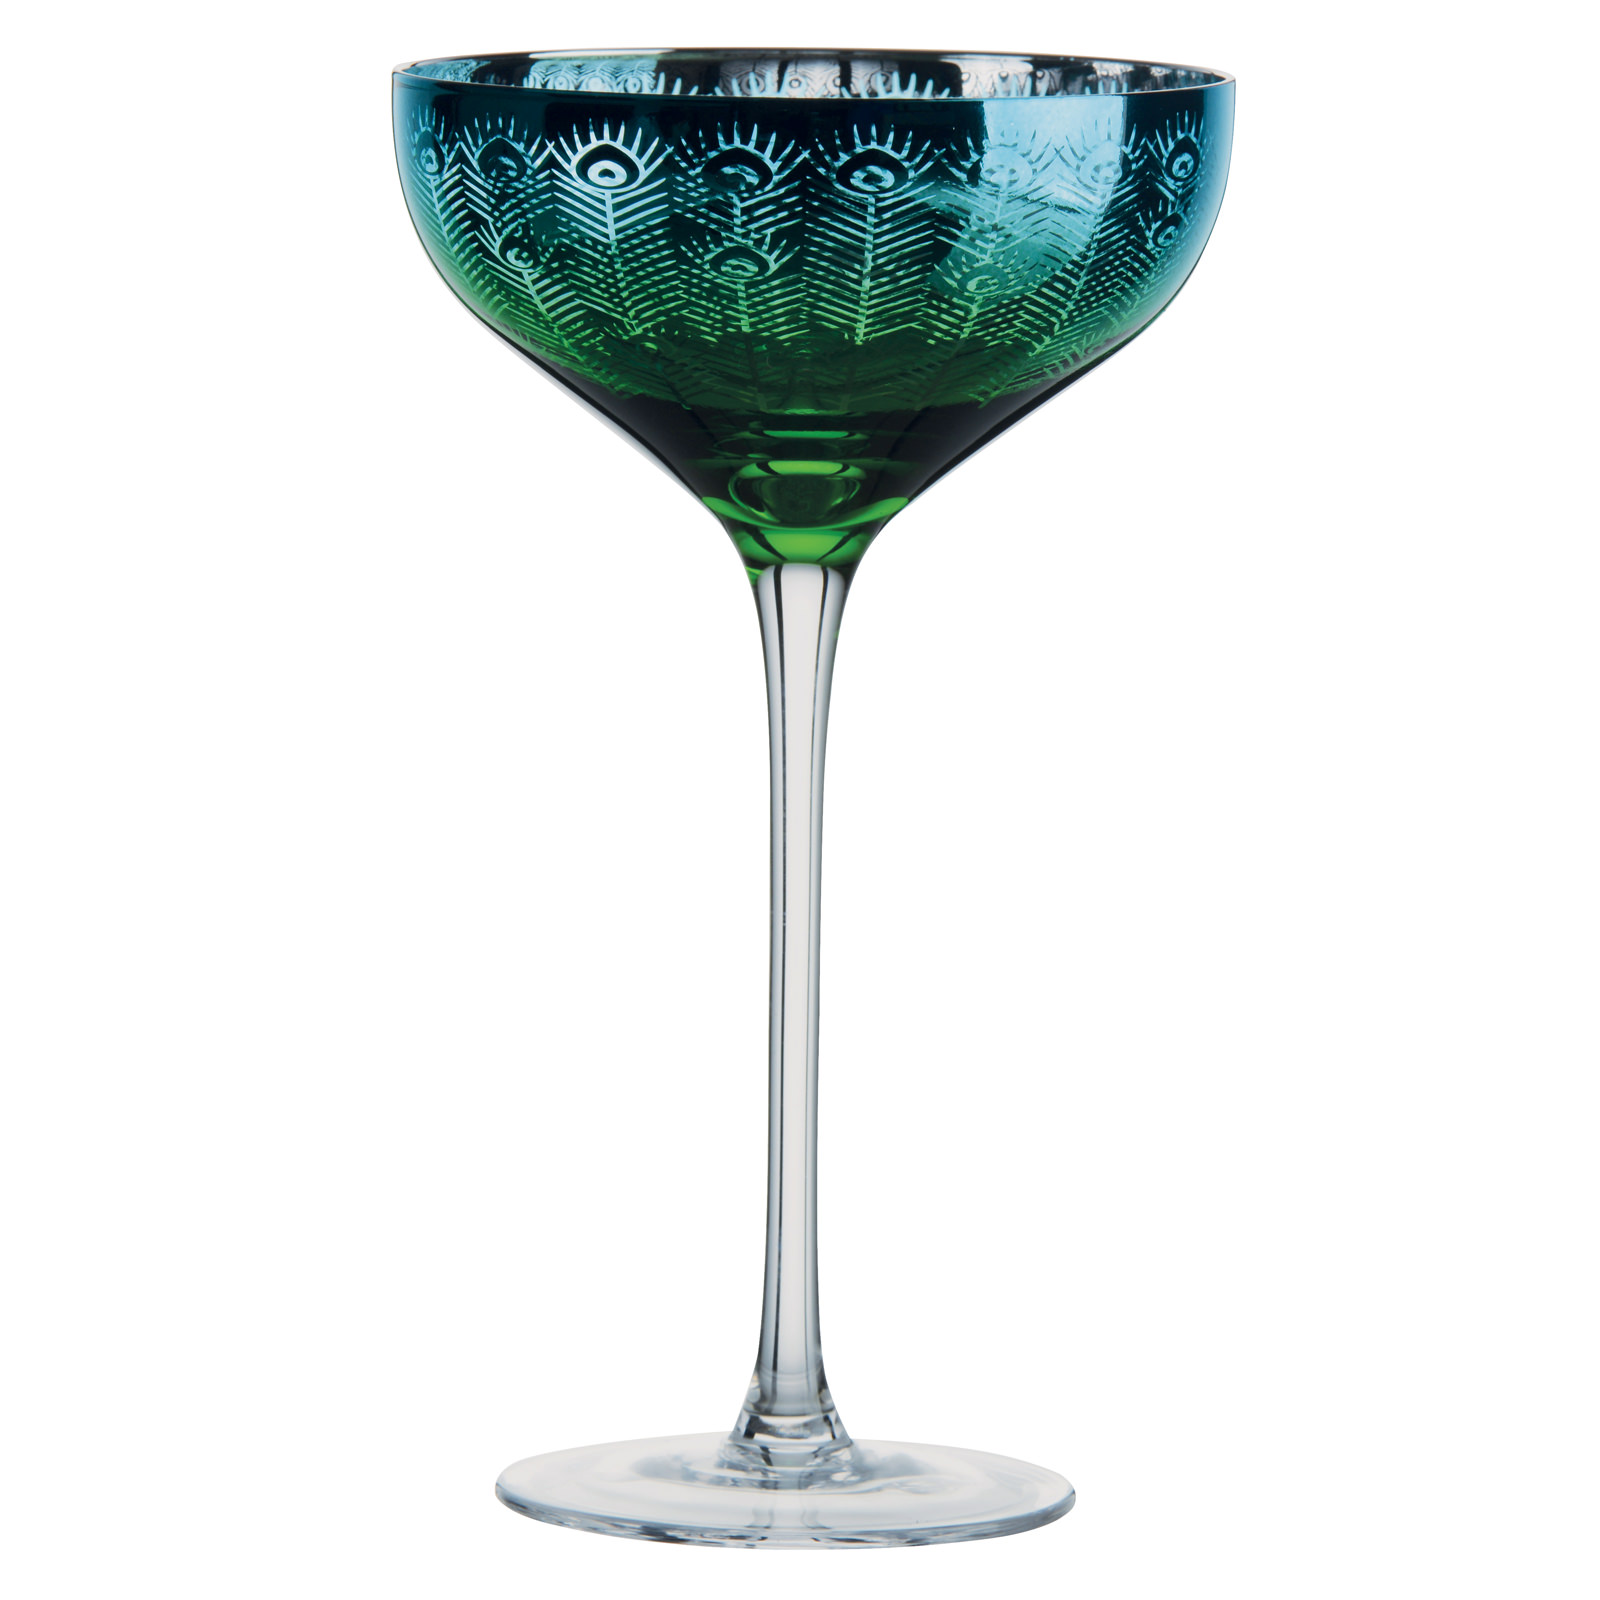 Set of 2 Peacock Champagne Saucers